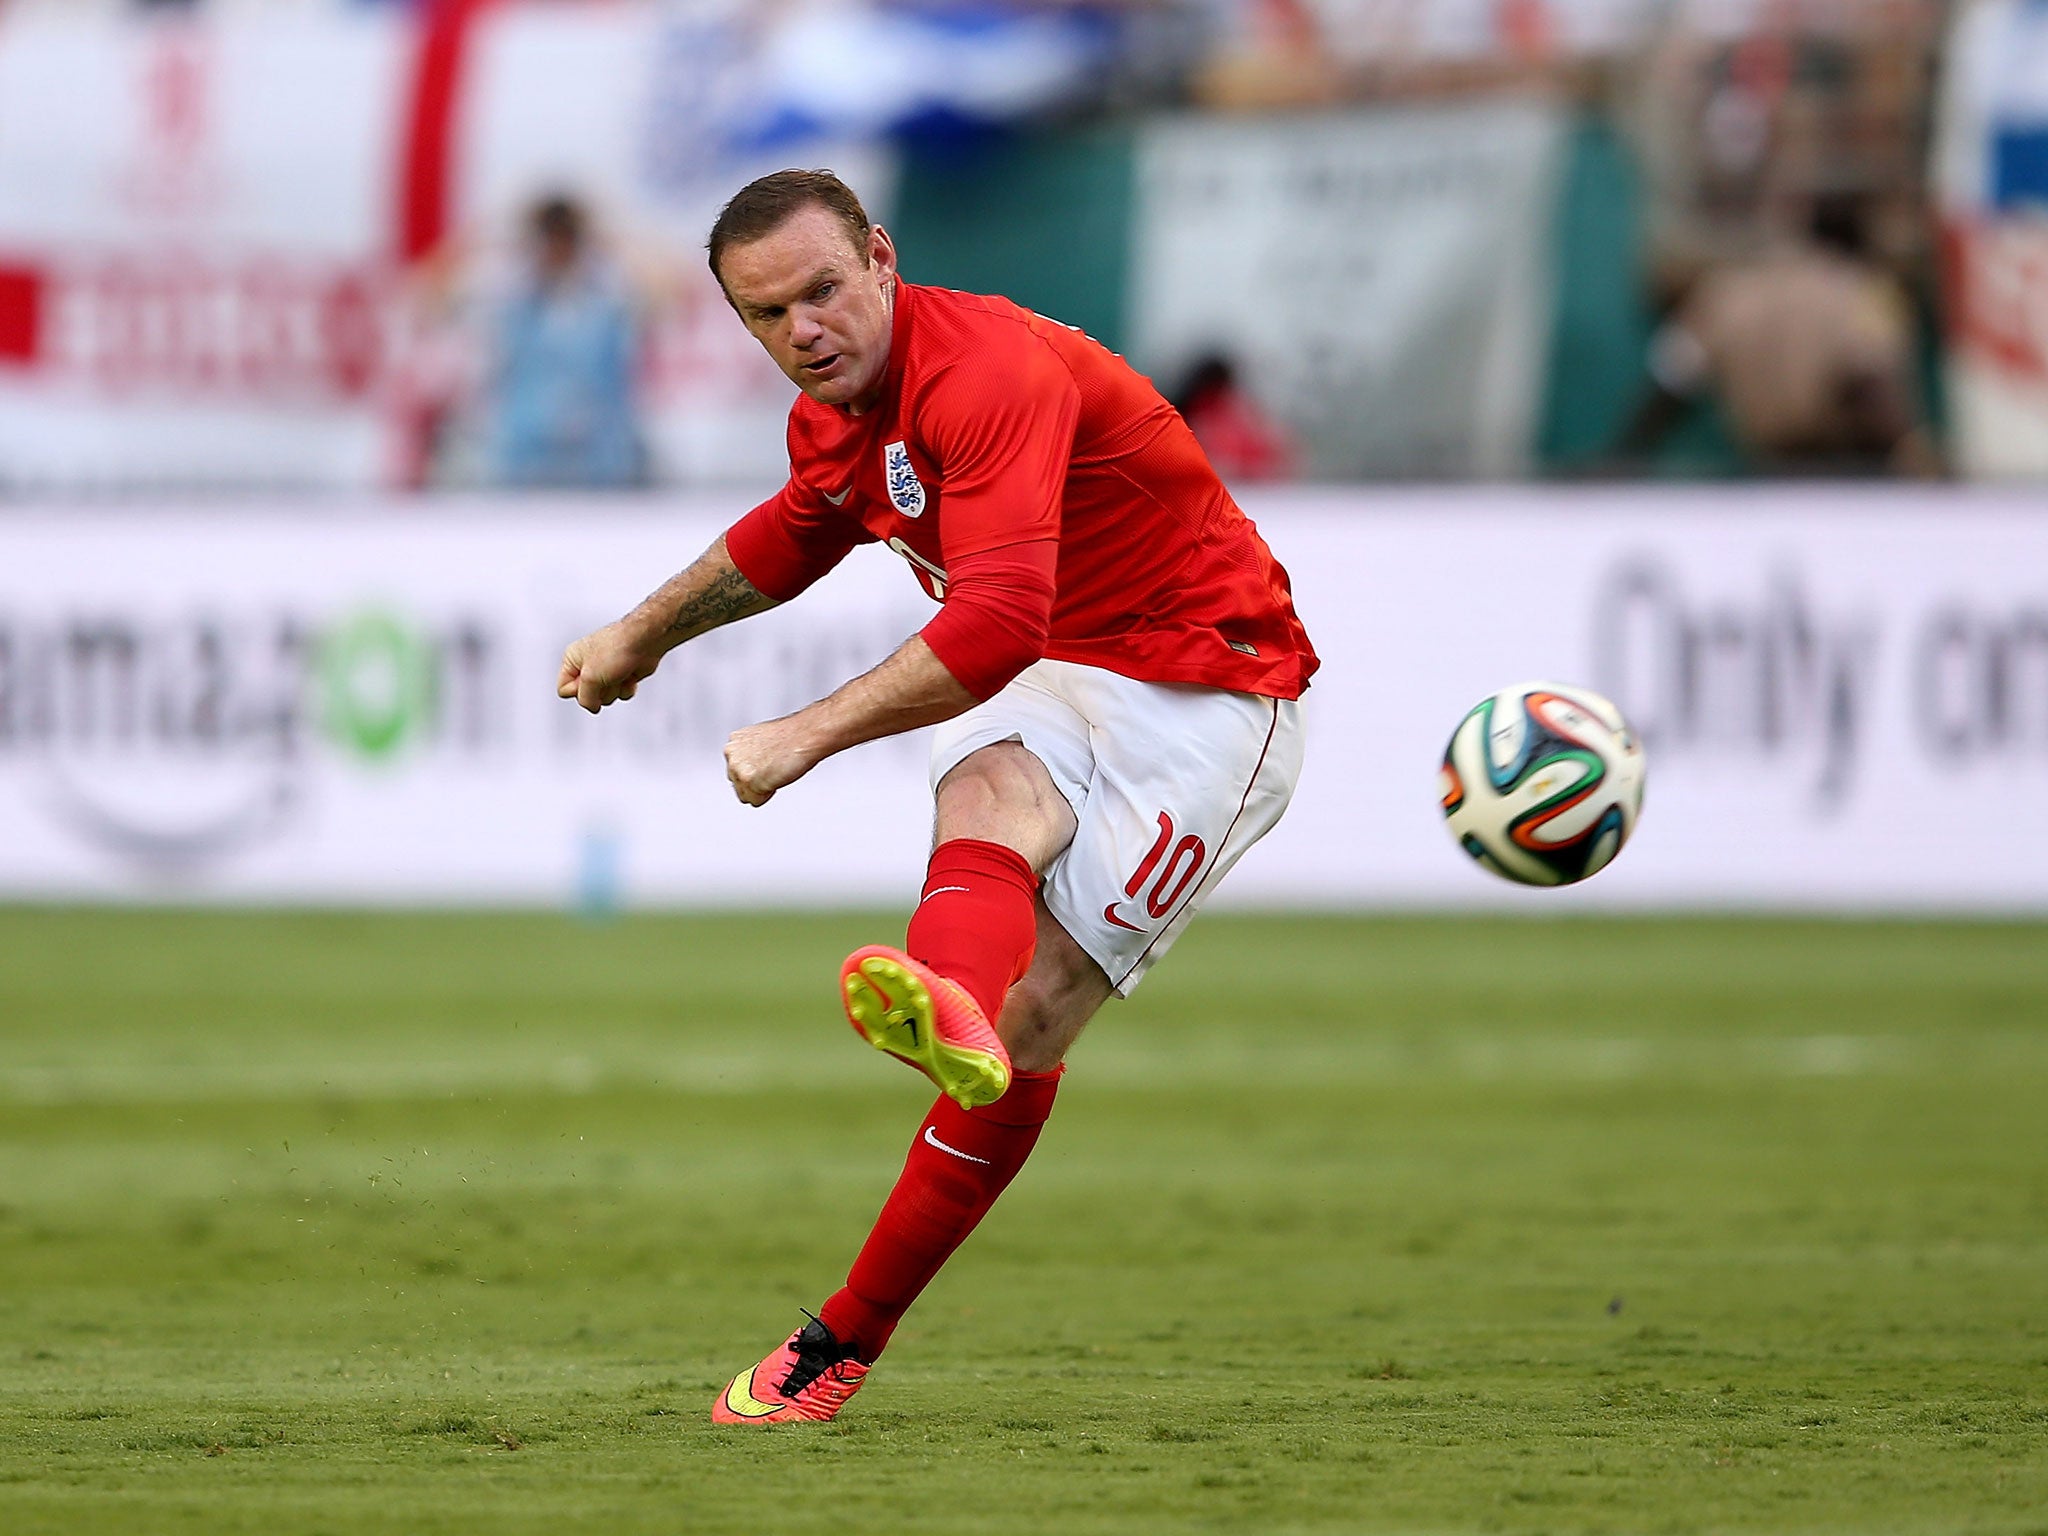 Wayne Rooney has scored 39 goals for England, but has never scored at a World Cup tournament. Can he end that record in Brazil?